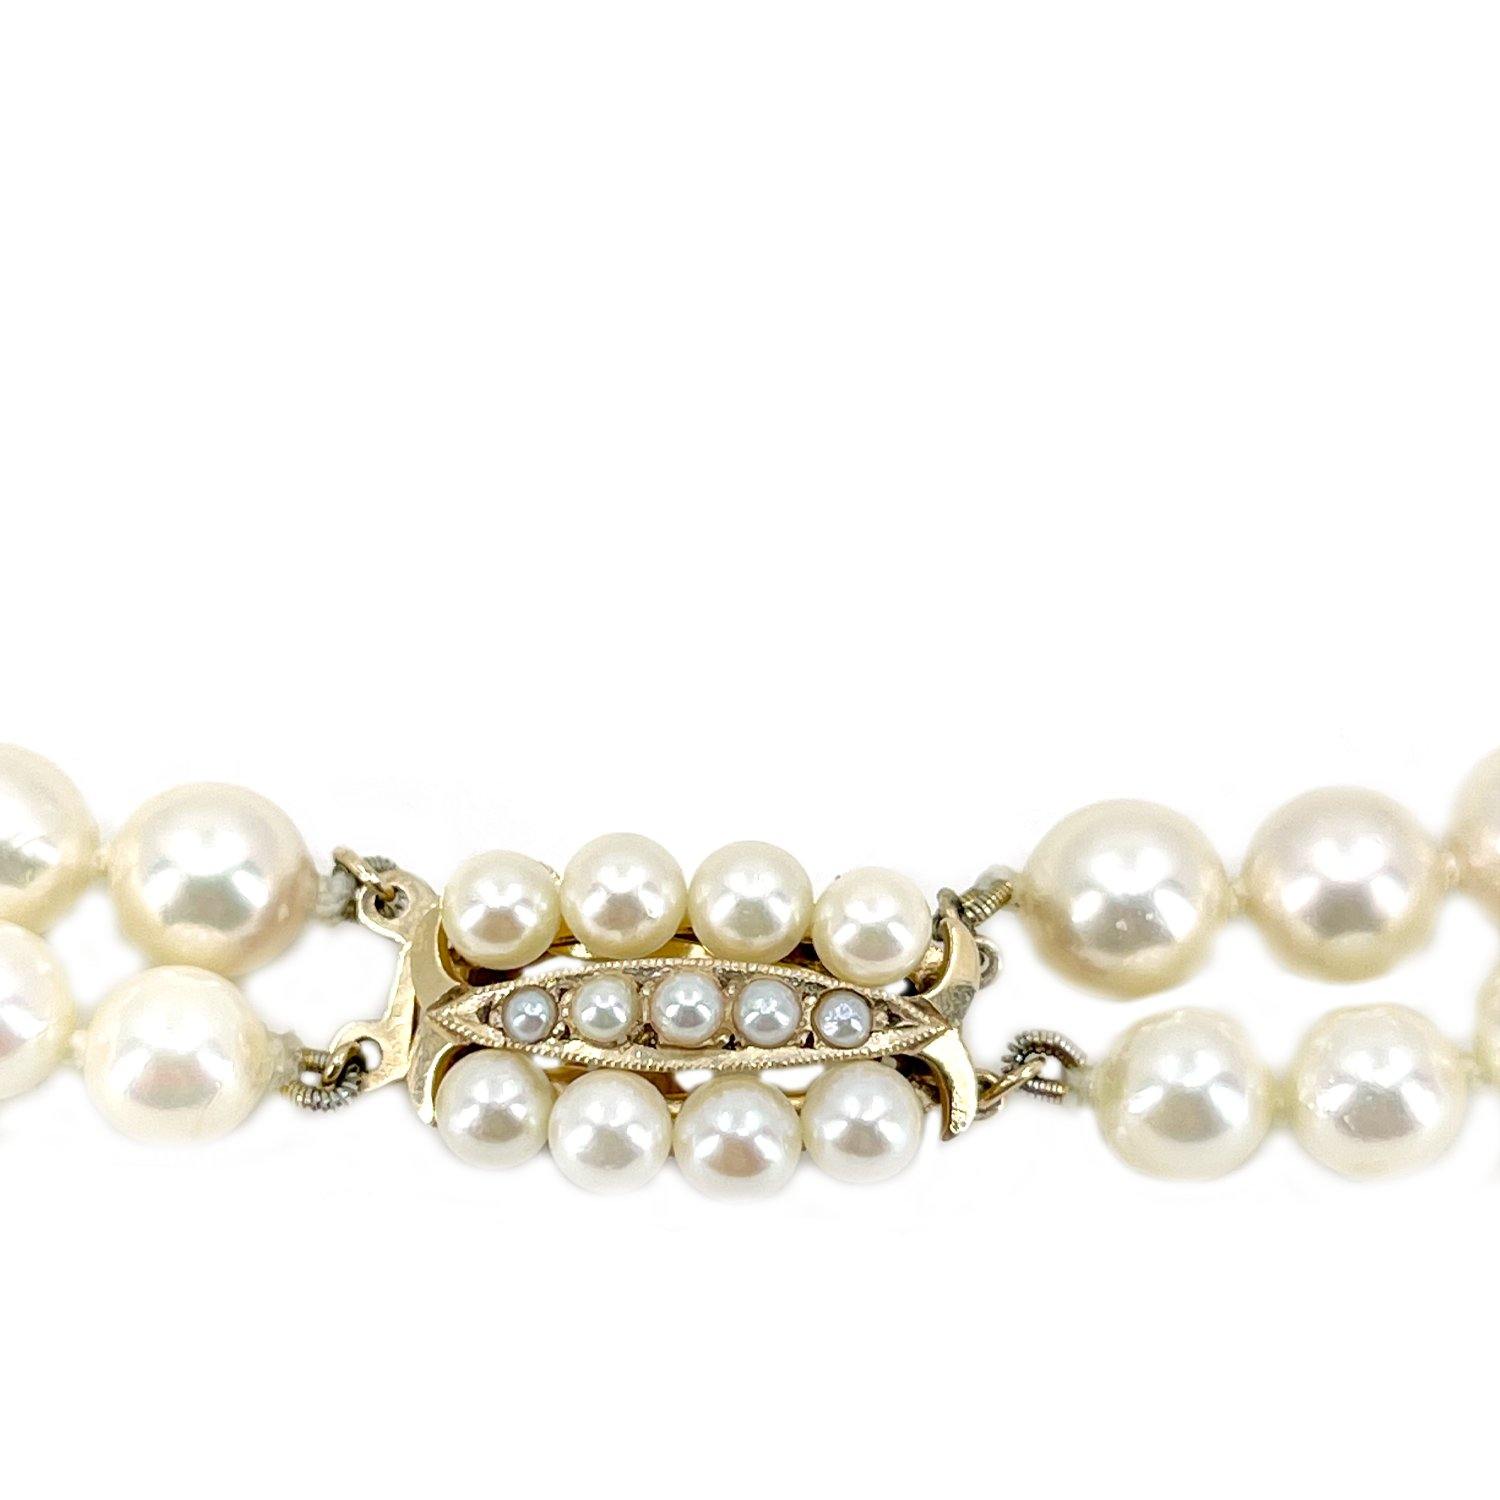  Double Strand Milgrain Halo Japanese Saltwater Cultured Akoya Pearl Necklace - 14K Yellow Gold 21.50-22.75 Inch